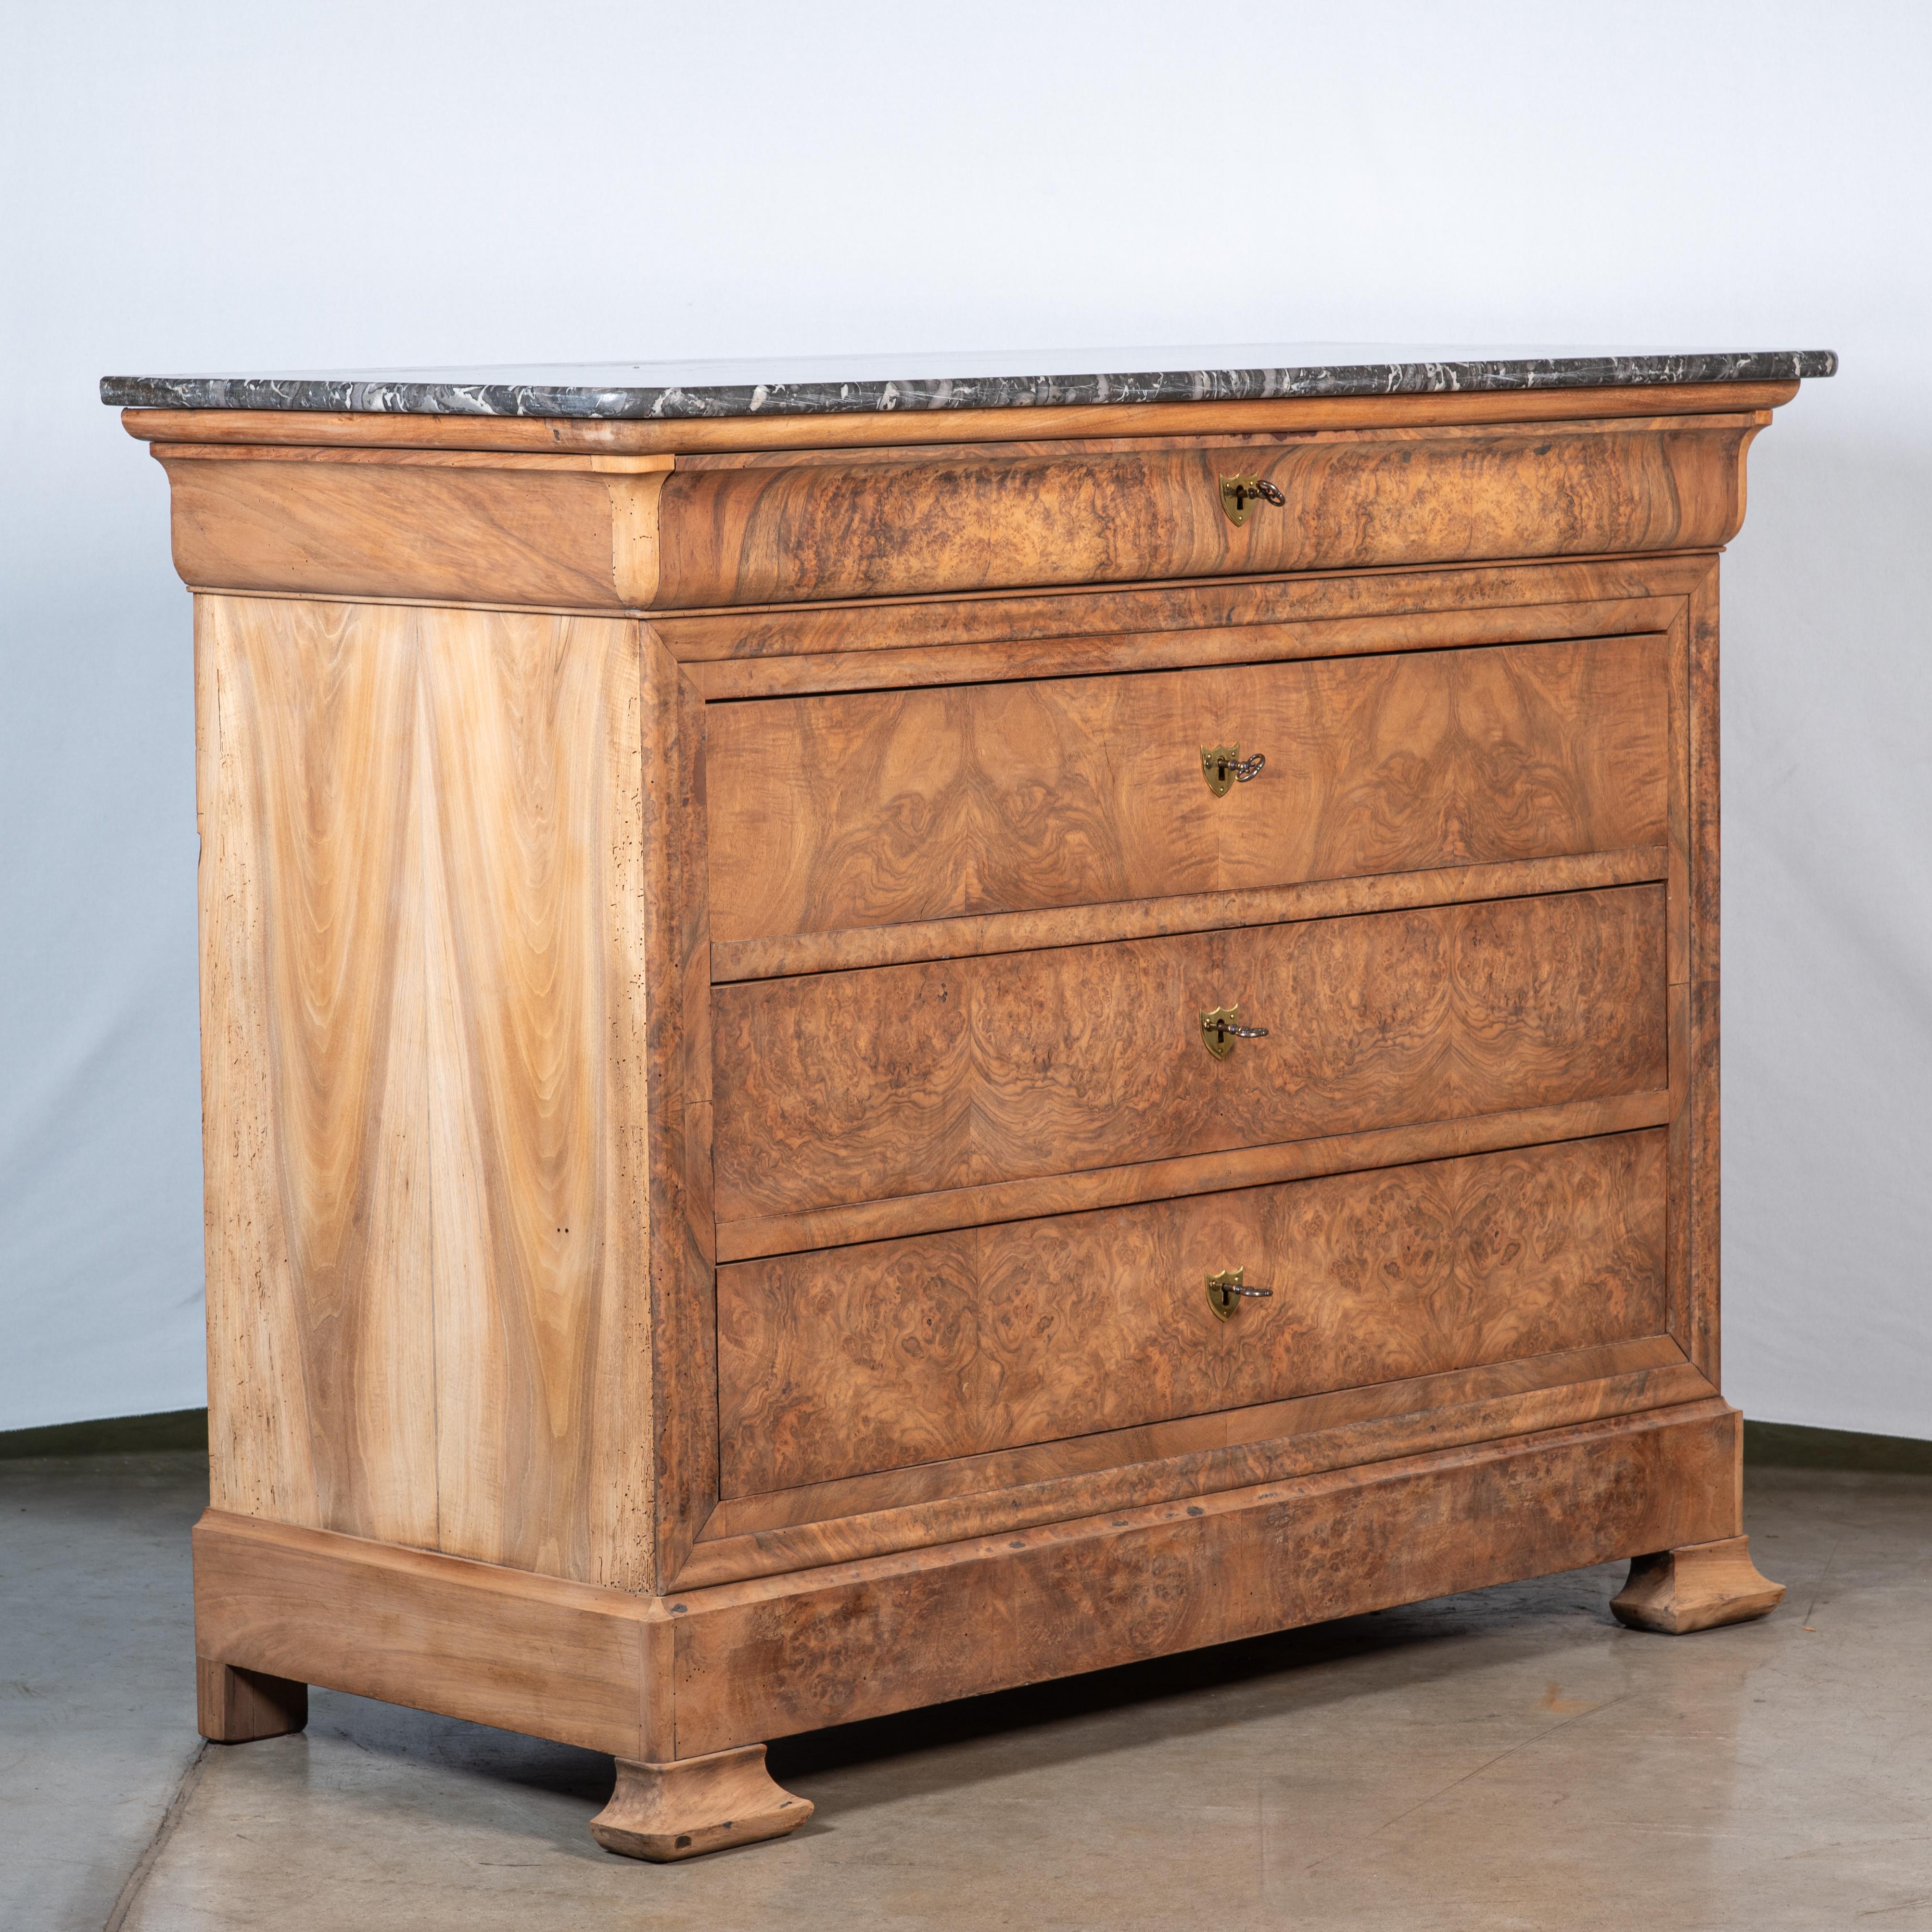 19th Century French Louis Philippe Burl Walnut Veneer Commode In Good Condition For Sale In San Antonio, TX